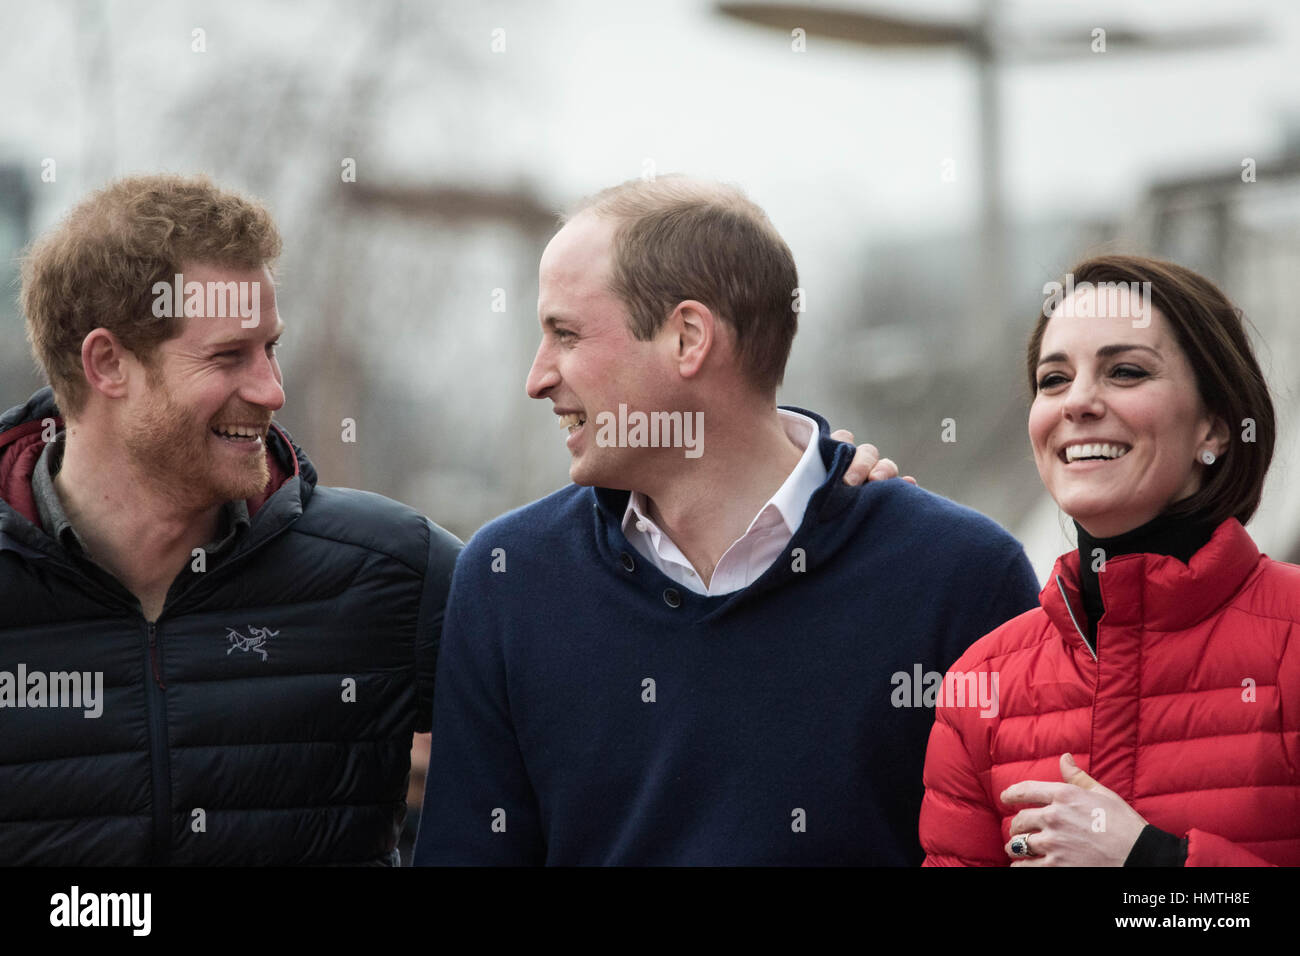 London, UK. 5th February, 2017. The Duke and Duchess of Cambridge and Prince Harry join a training day at the Queen Elizabeth Olympic Park with the runners taking part in the 2017 London Marathon for Heads Together, the official charity of the year. © Guy Corbishley/Alamy Live News Stock Photo